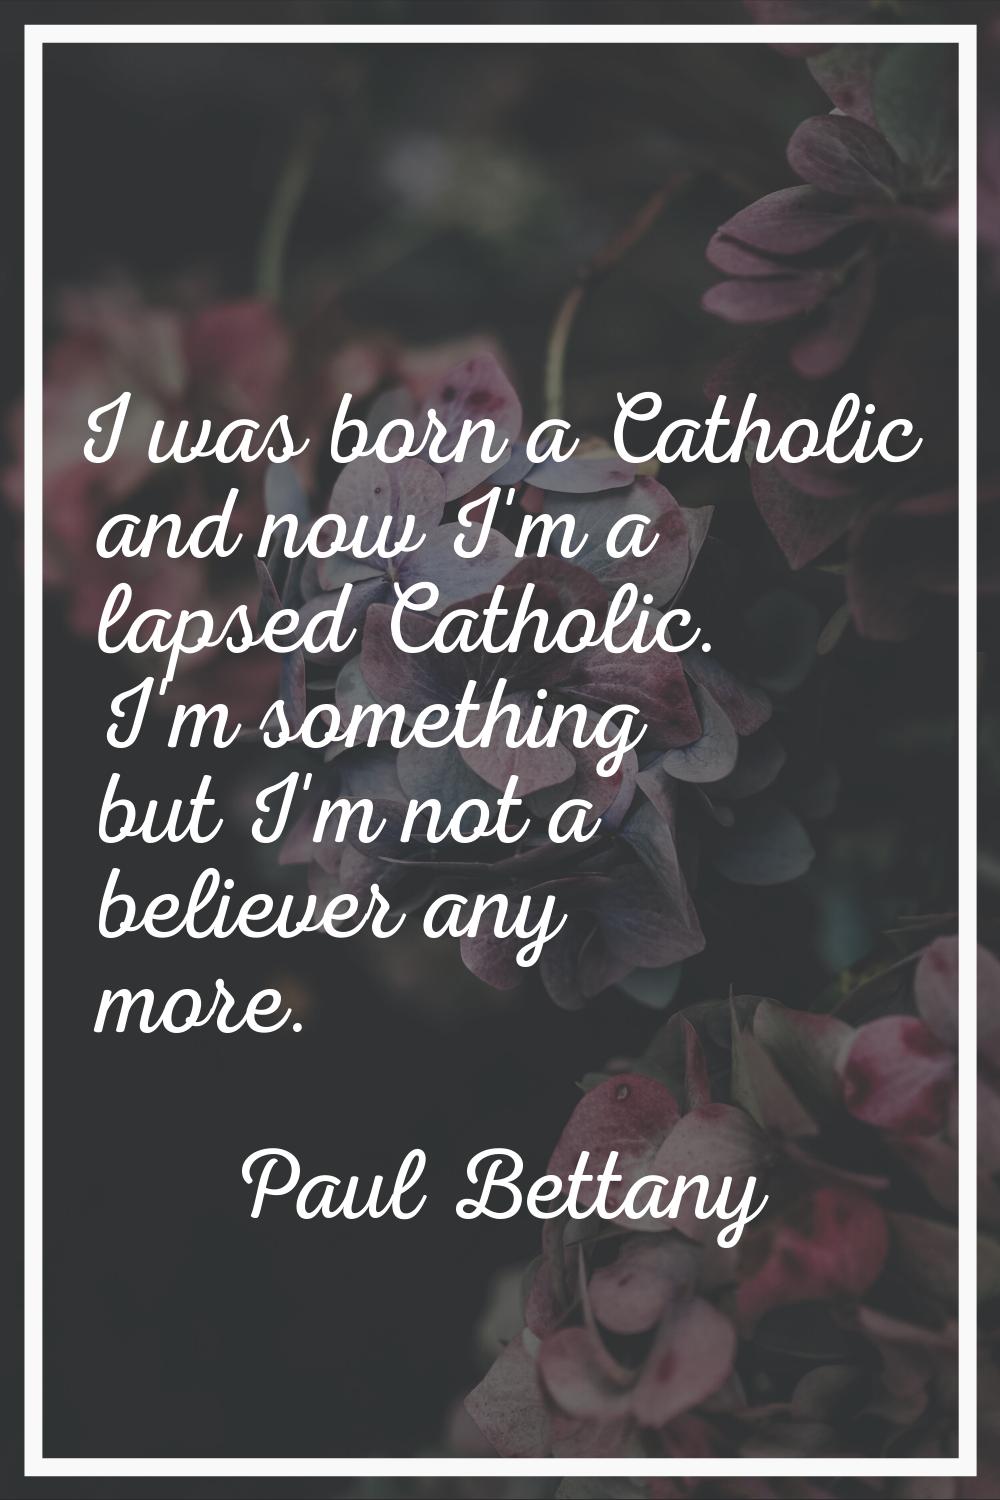 I was born a Catholic and now I'm a lapsed Catholic. I'm something but I'm not a believer any more.